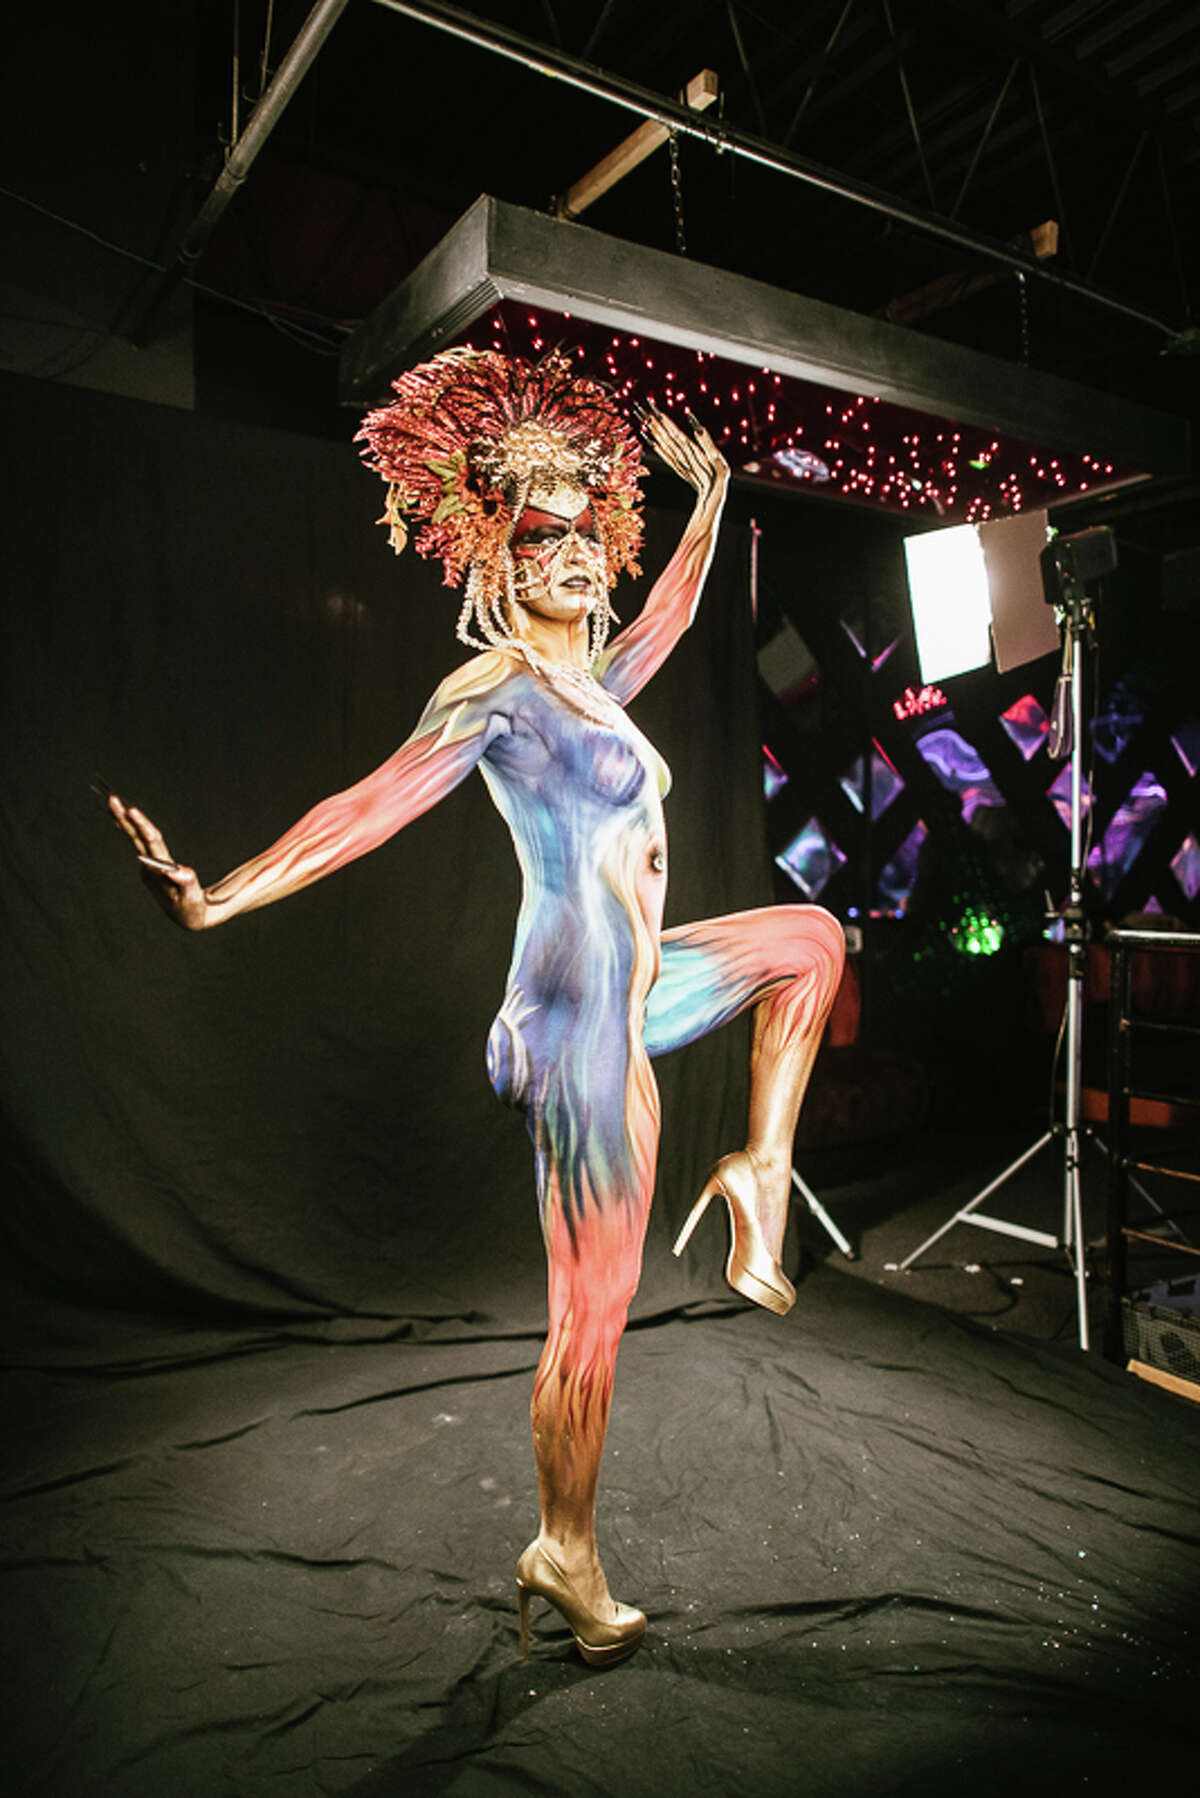 Things got surreal at the Beyond the Canvas body painting event Saturday, Nov. 19, 2016, at Club Rio where 30 artists competed for cash prizes and awards.